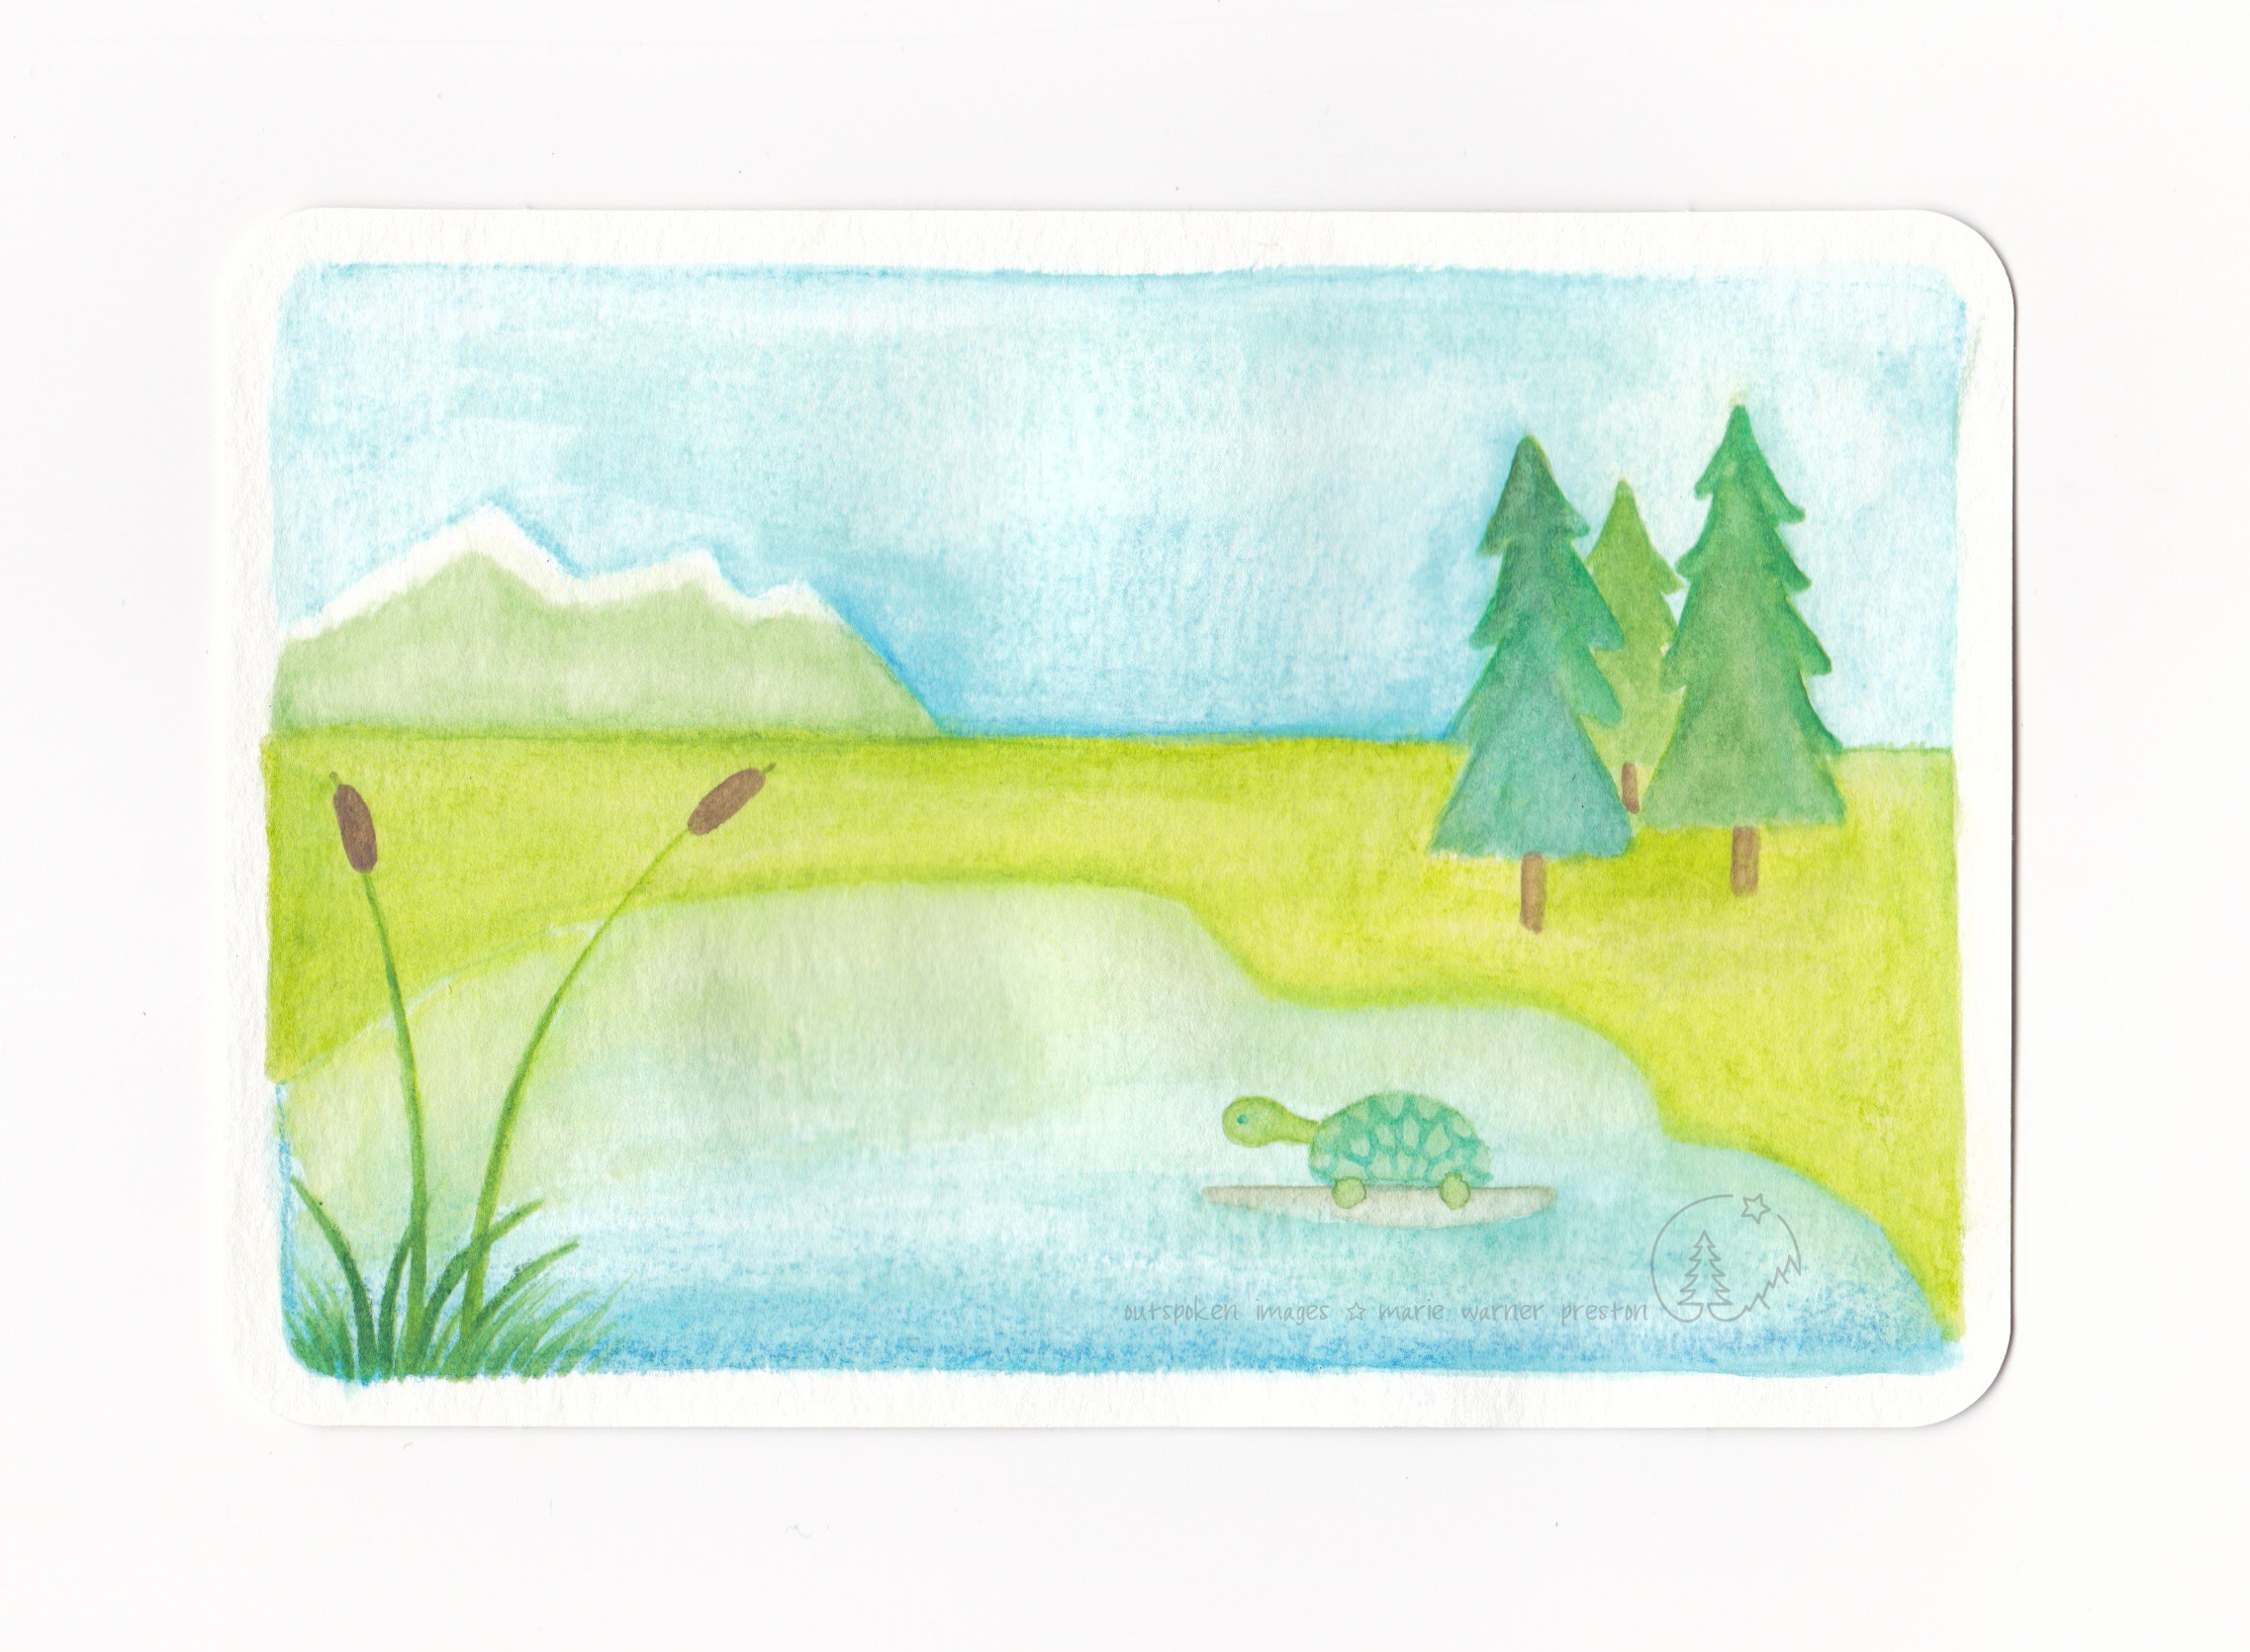 Malachite. Watercolour painting: Green and brown cattails, blue pond, green turtle on rock, green trees and mountains against blue sky in background. ©2021 Outspoken Images by Marie Warner Preston